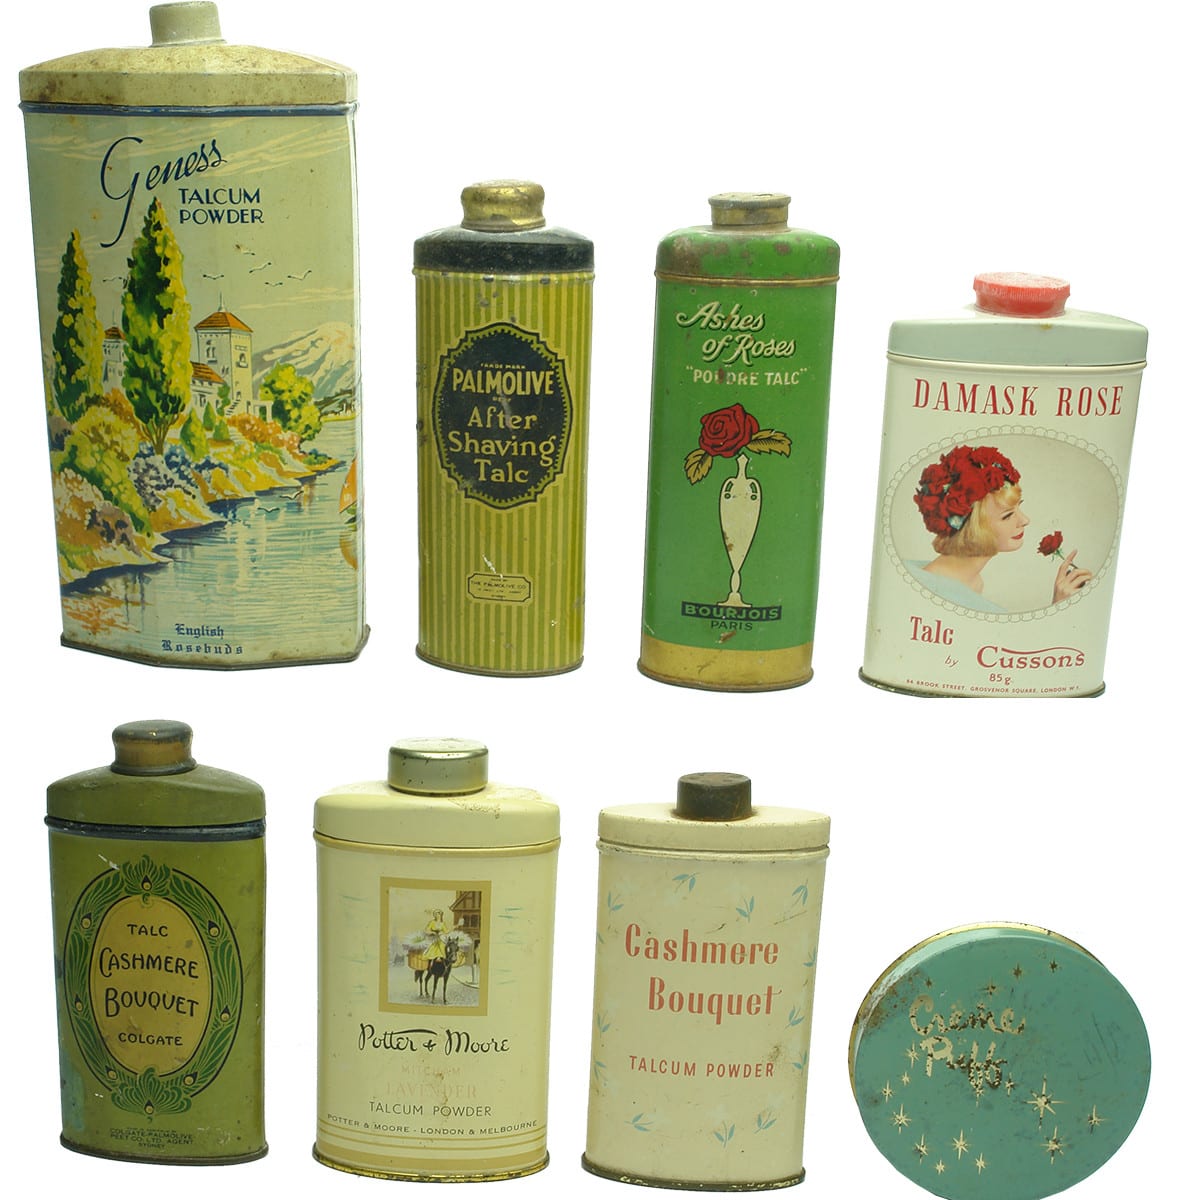 Eight Tins: Talcum Powder and Cosmetics. Geness, Cussons, Bourjois, Potter & Moore; Palmolive; Colgate; Max Factor.